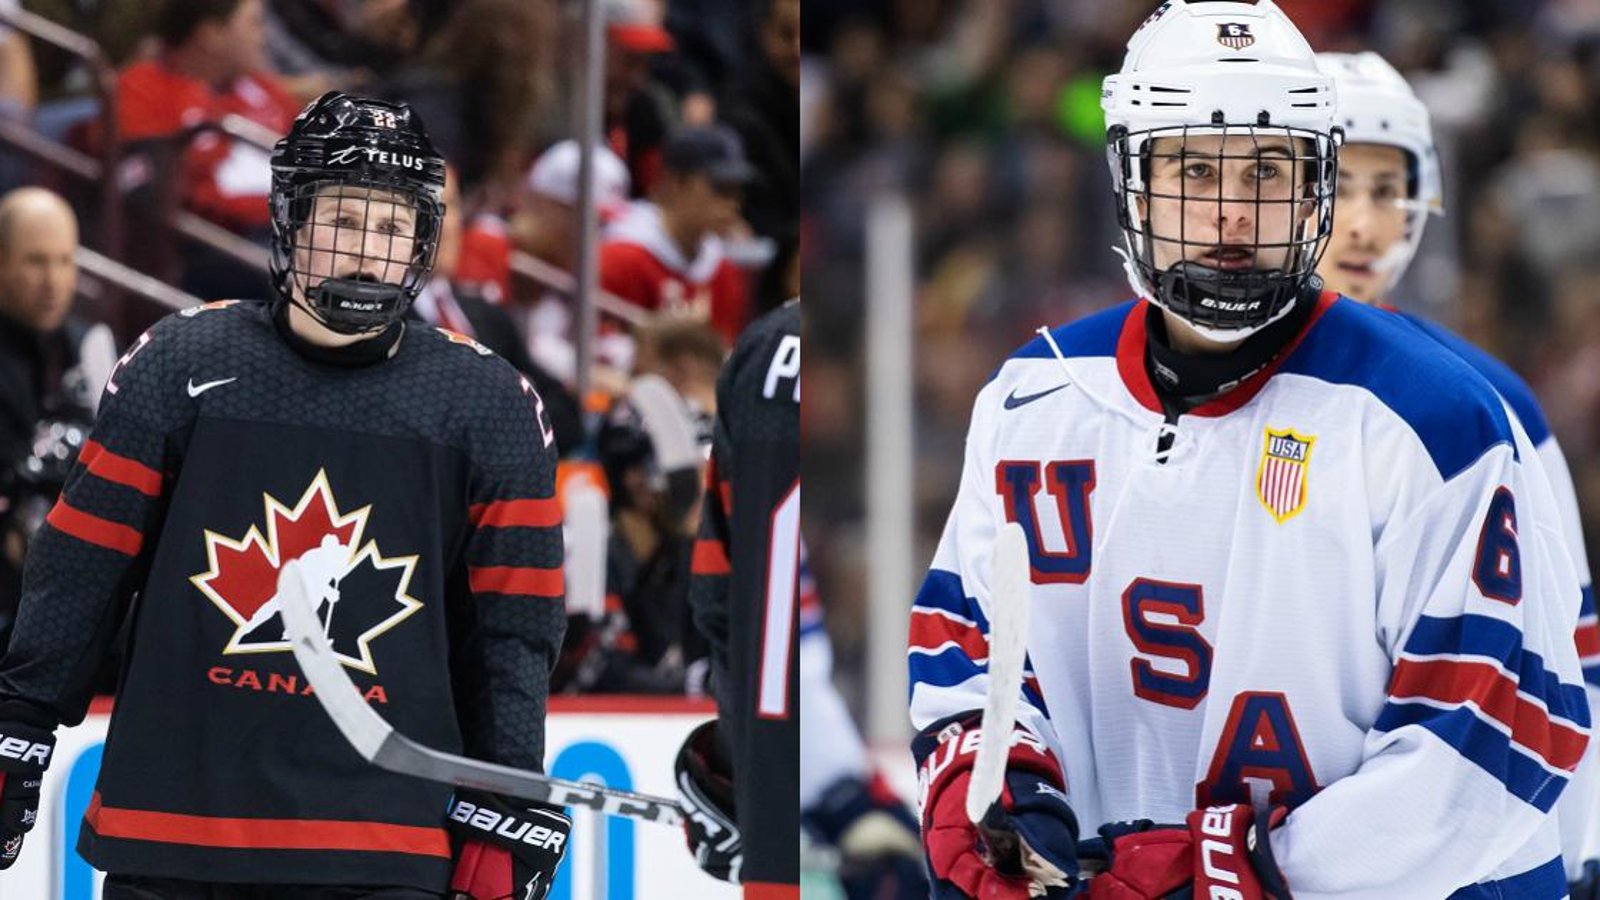 Large number of players have dropped out of the World Juniors.